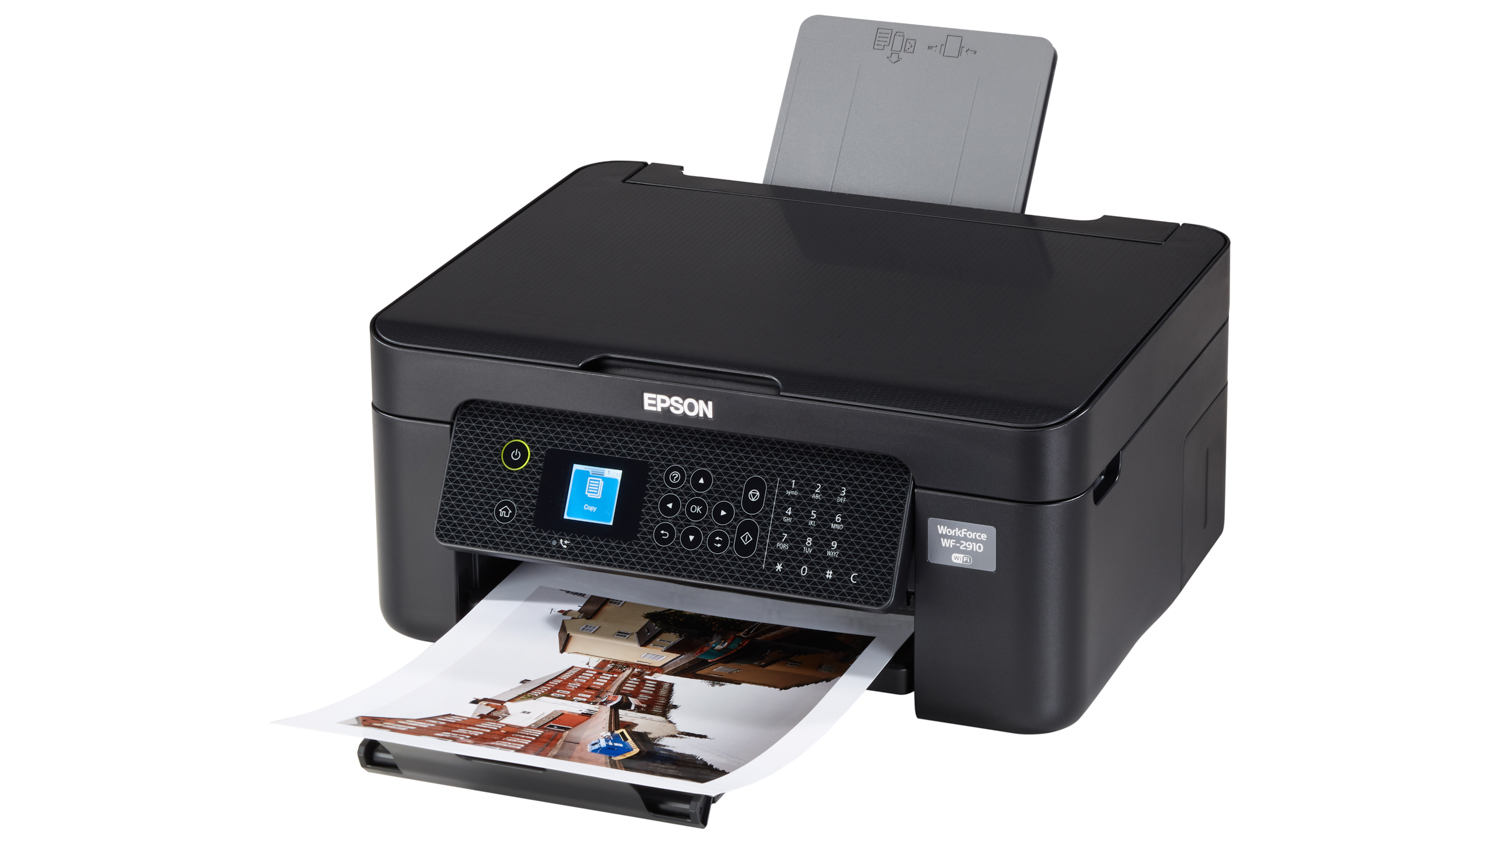 A large marketing image providing additional information about the product Epson WorkForce WF2910 Colour WiFi Multifunction InkJet Printer - Additional alt info not provided